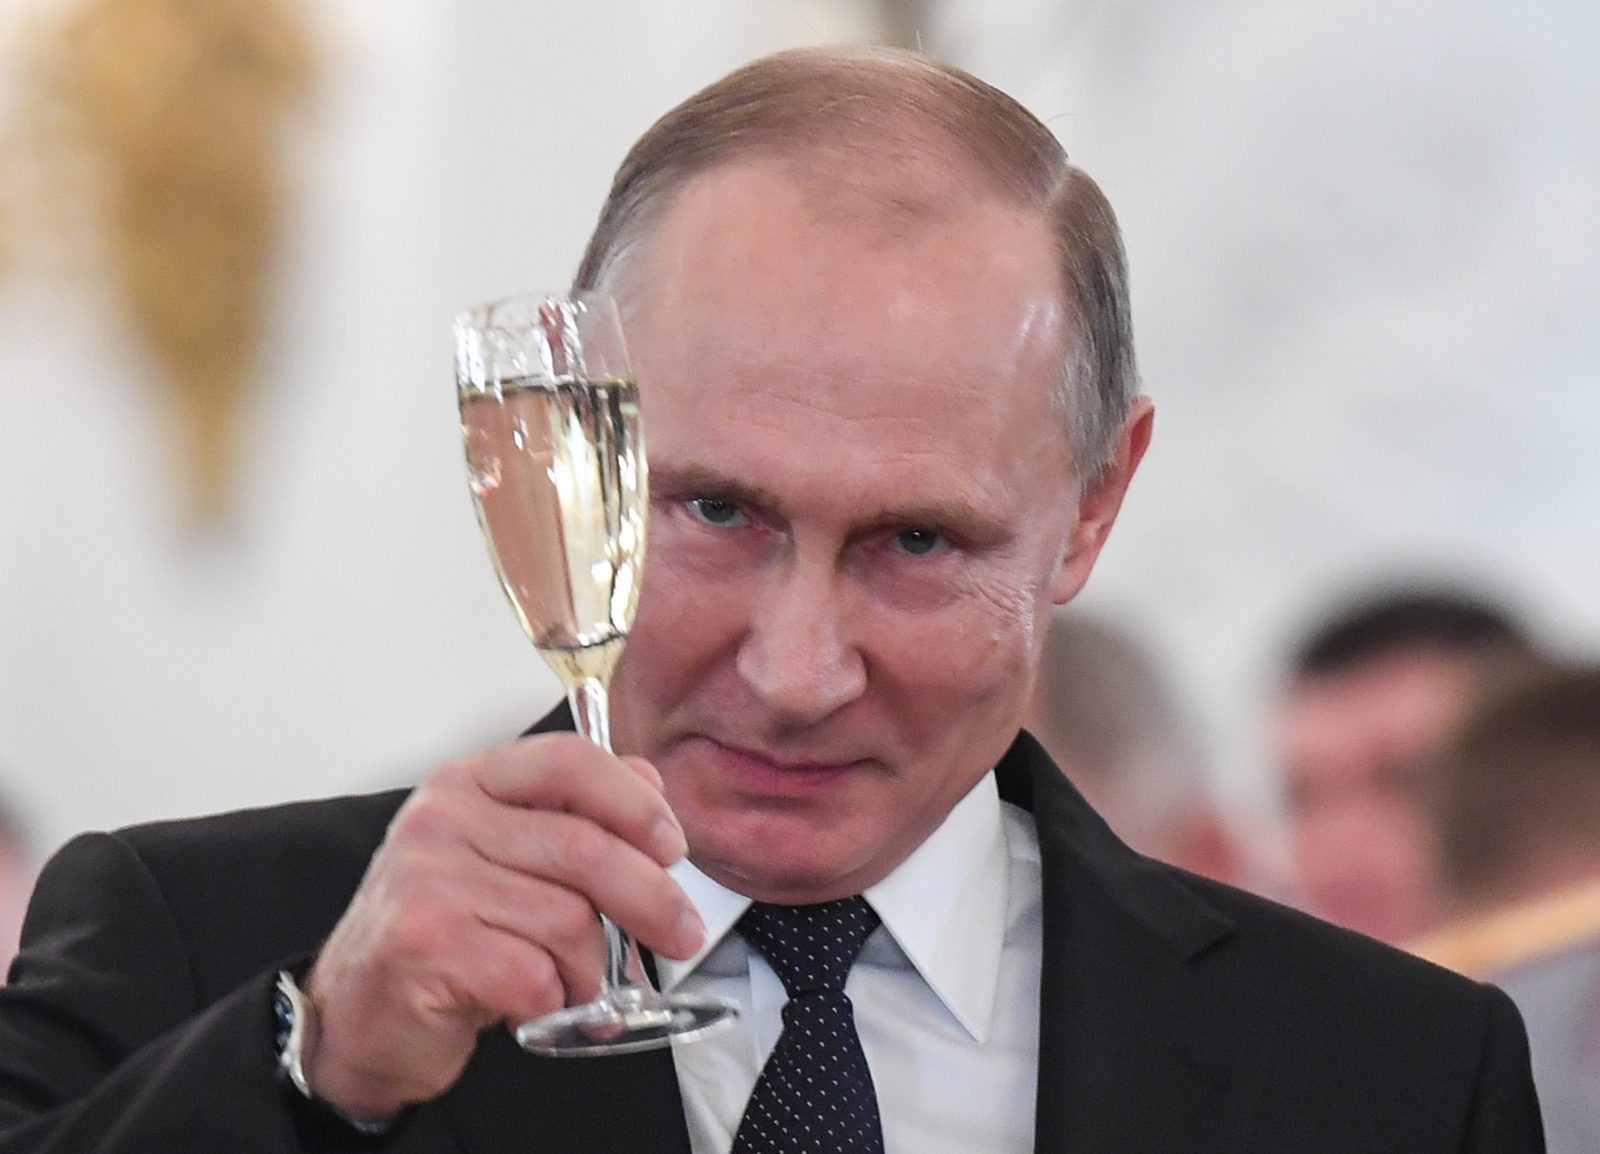 Pussy Riot members had staged the protest to mark Vladimir Putin's birthday 